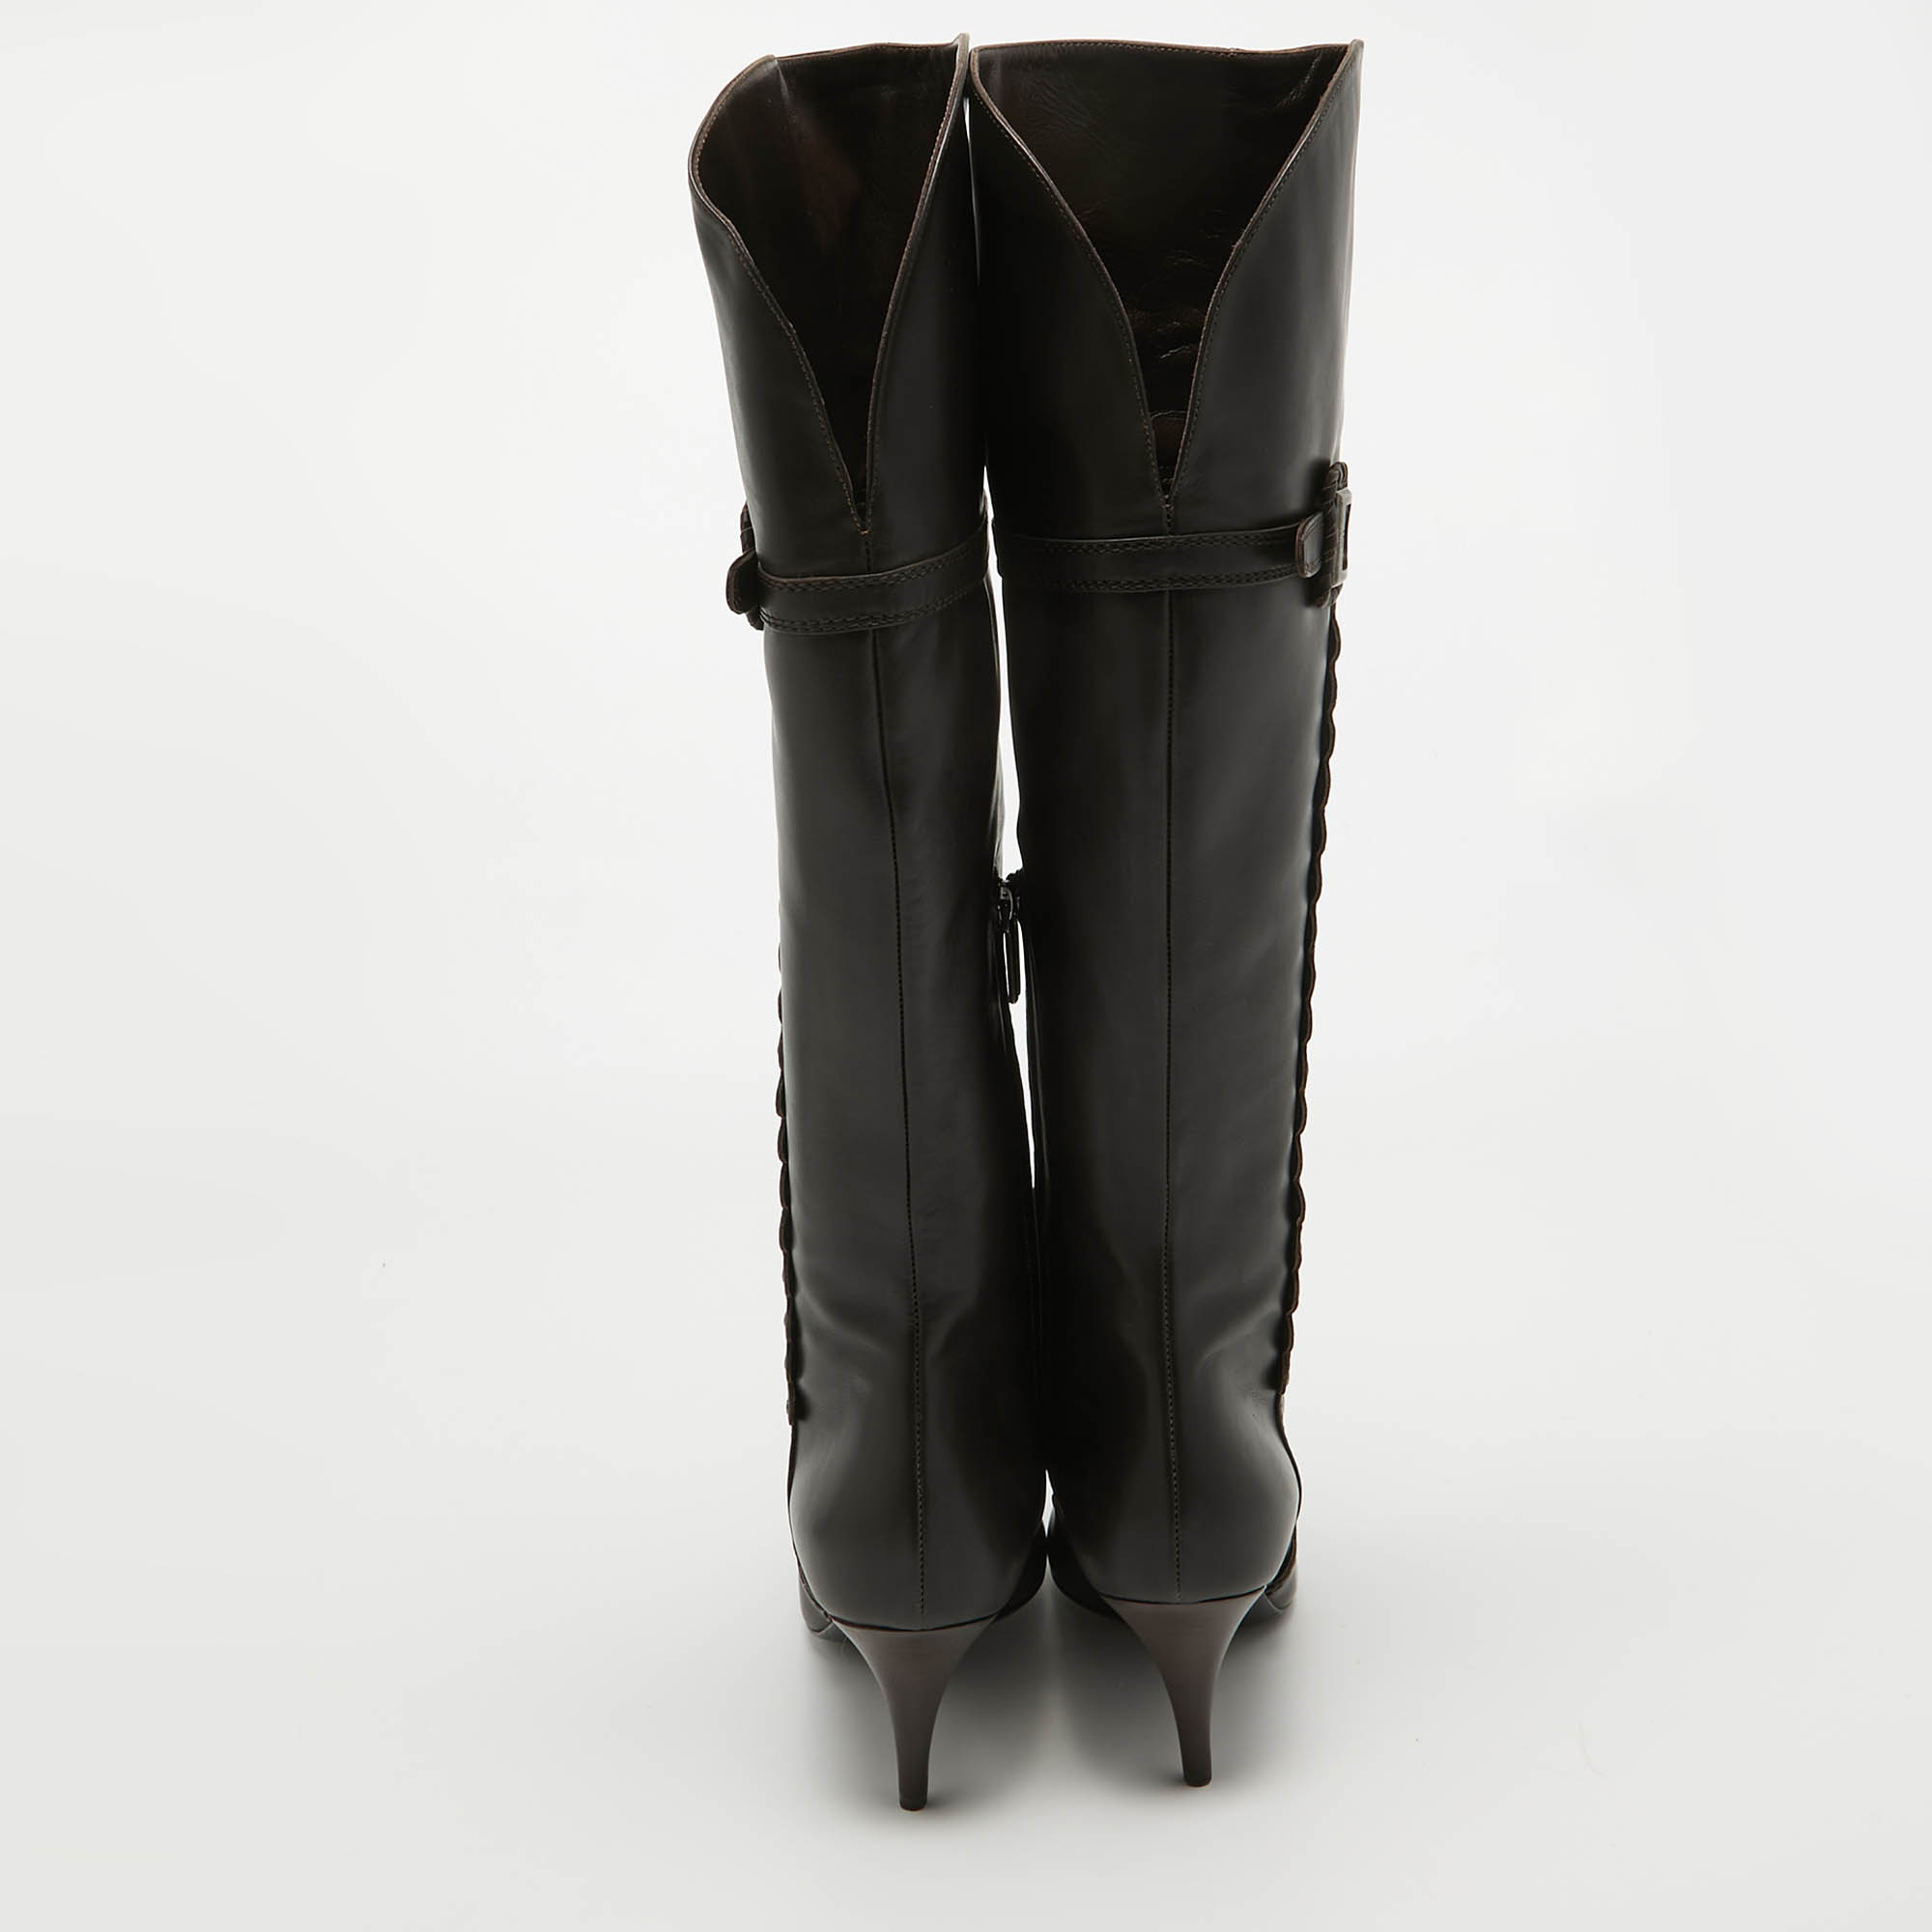 Dior Brown Leather Embellished Knee Length Boots Size 39.5